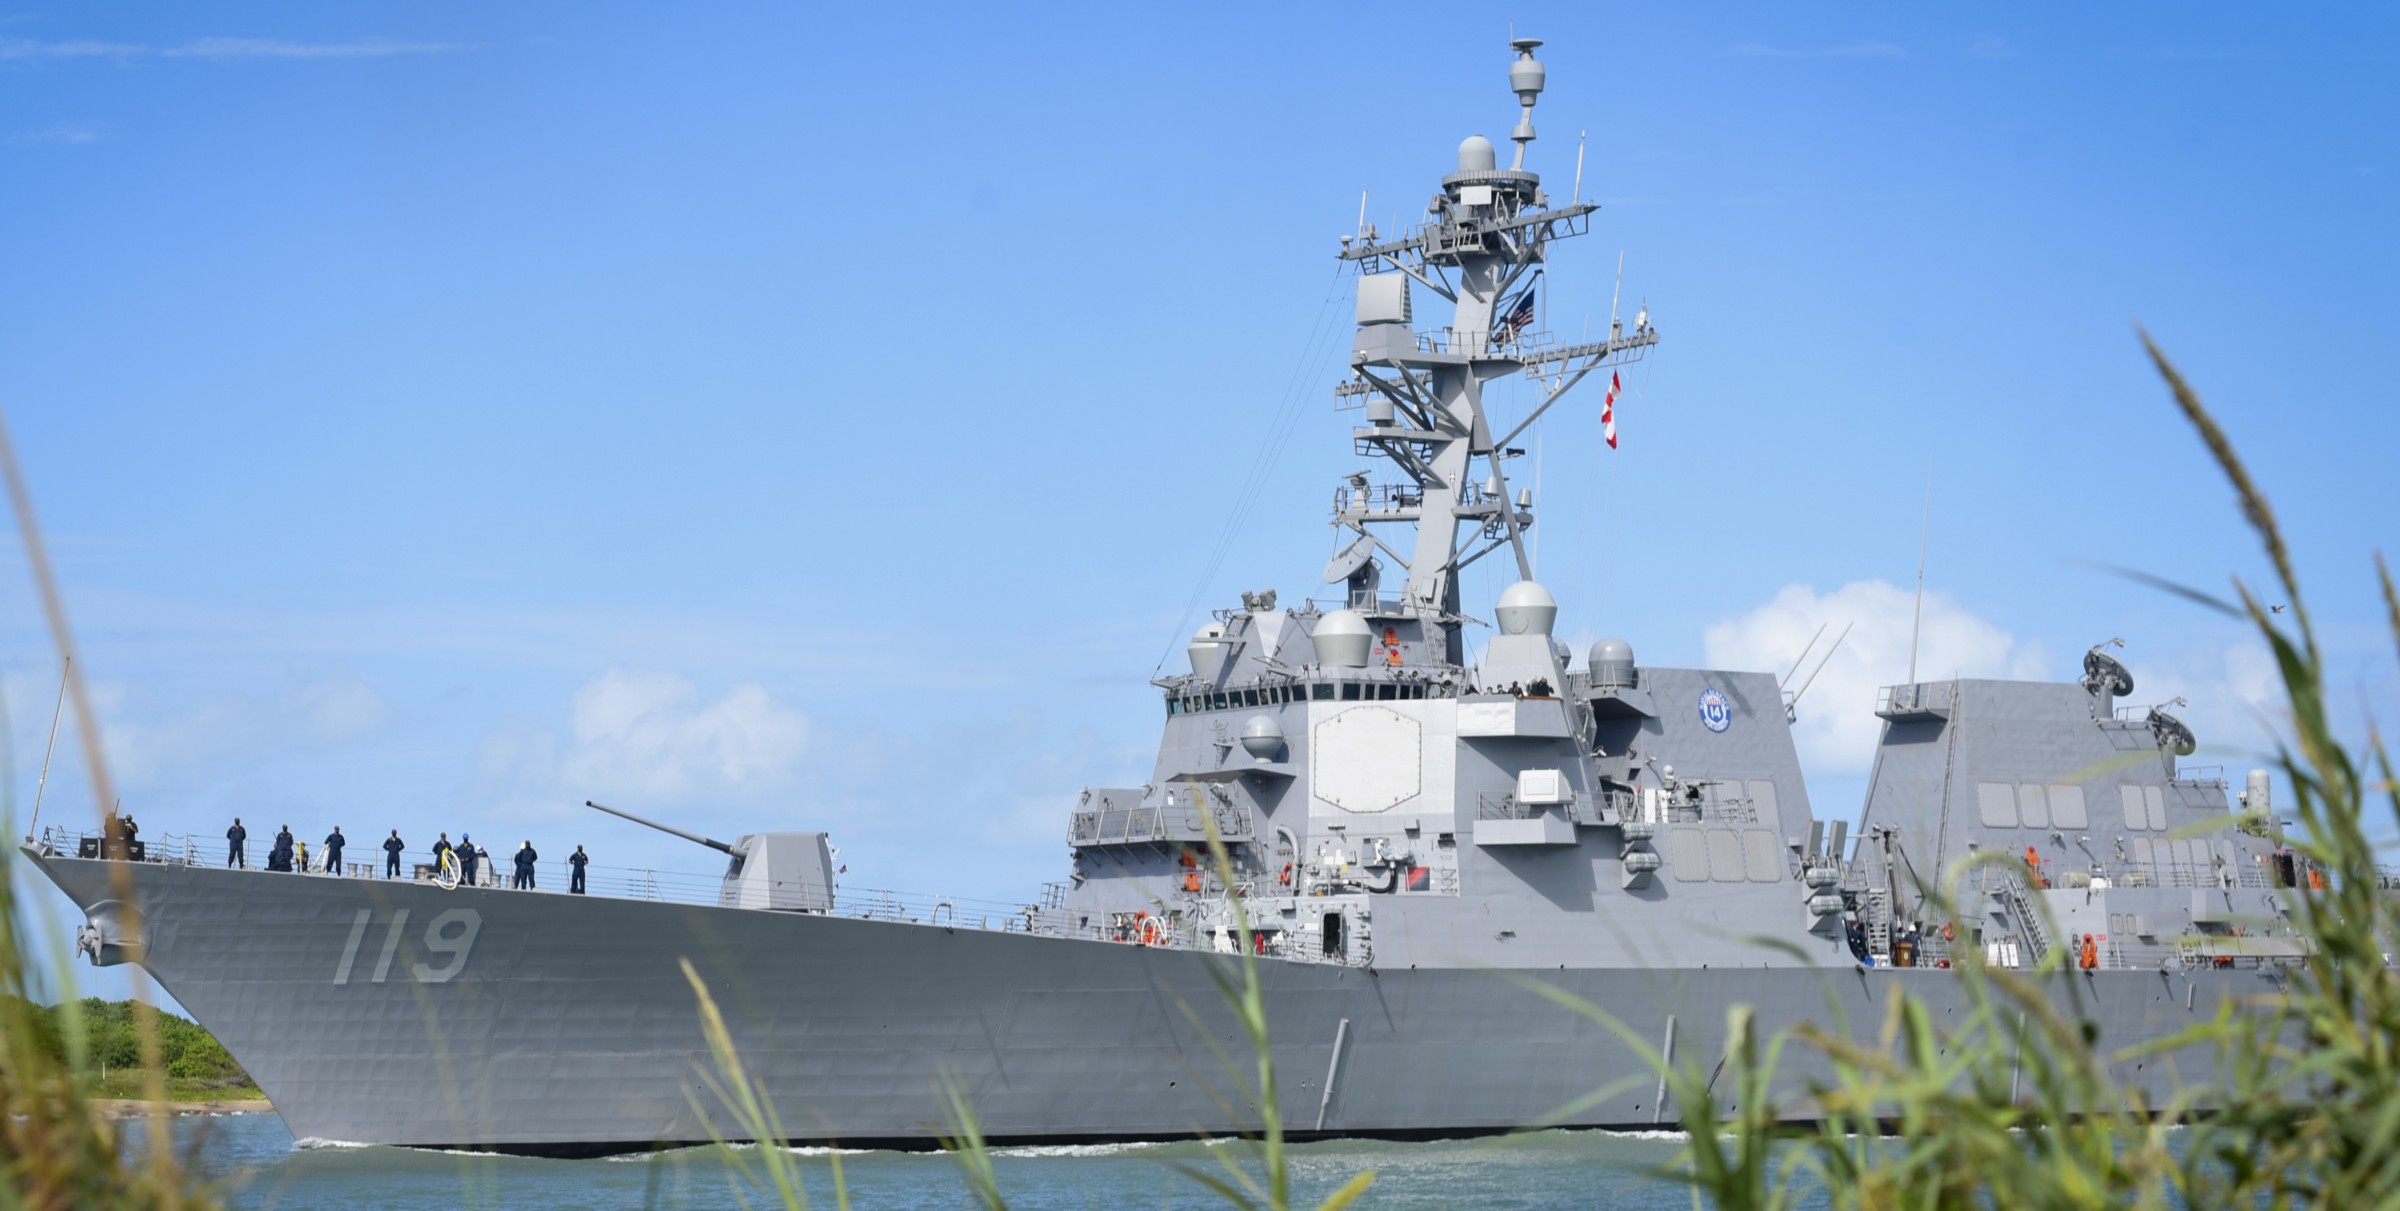 ddg-119 uss delbert d. black arleigh burke class guided missile destroyer us navy aegis port canaveral florida 09